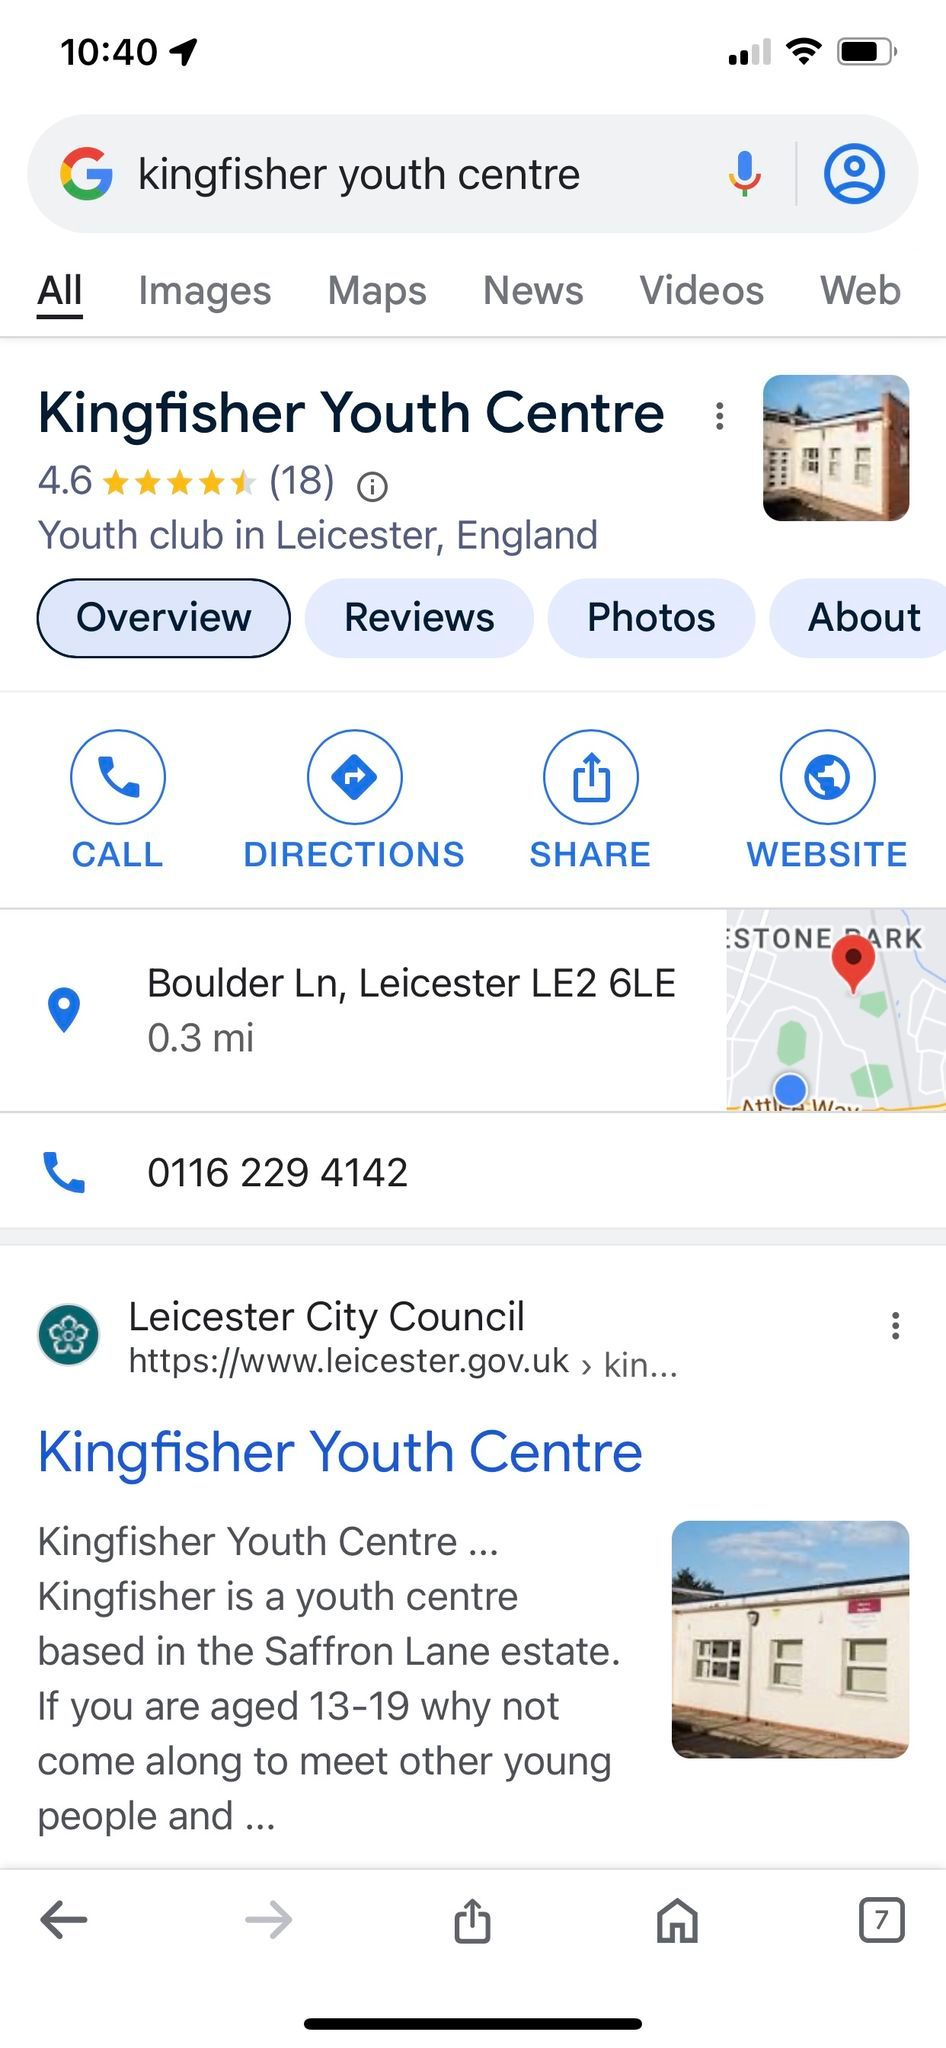 The kingfisher youth centre field - family friendly litter pick